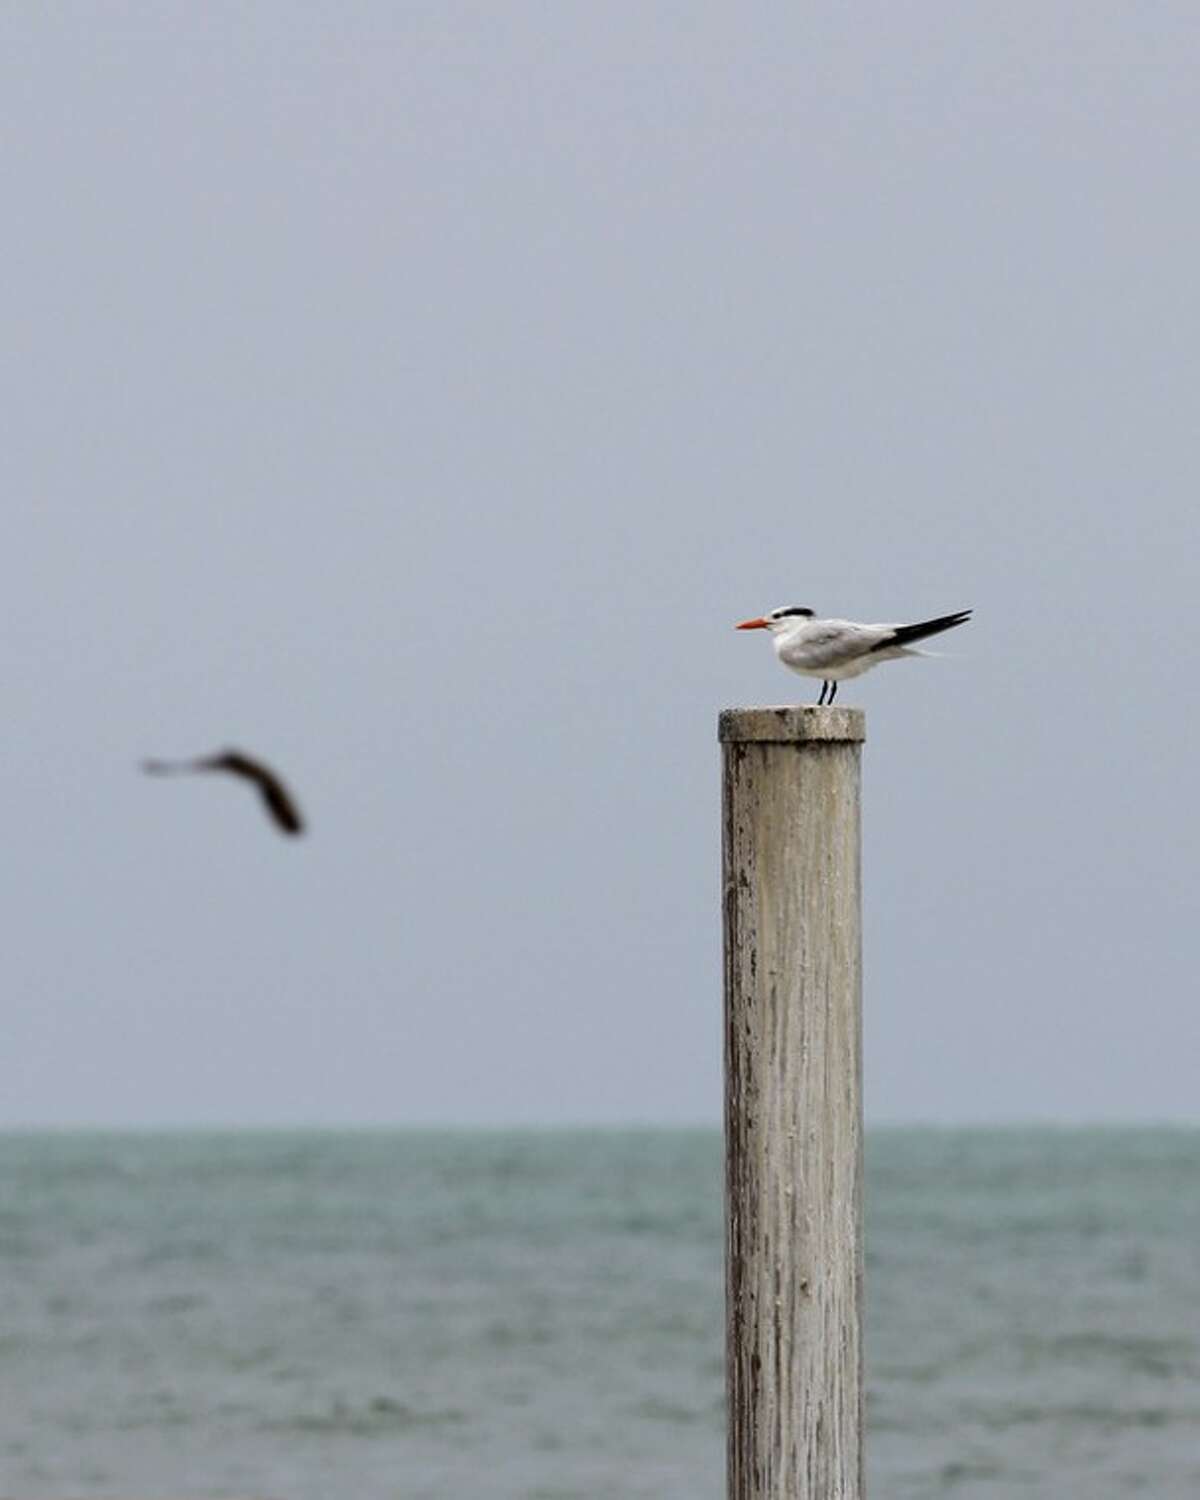 A seagull perches on a post in Key West, Fla., Saturday, Aug. 25, 2012, Saturday, Aug. 25, 2012. Tropical Storm Isaac's winds are expected to be felt in the Florida Keys by sunrise Sunday morning. (AP Photo/Alan Diaz)